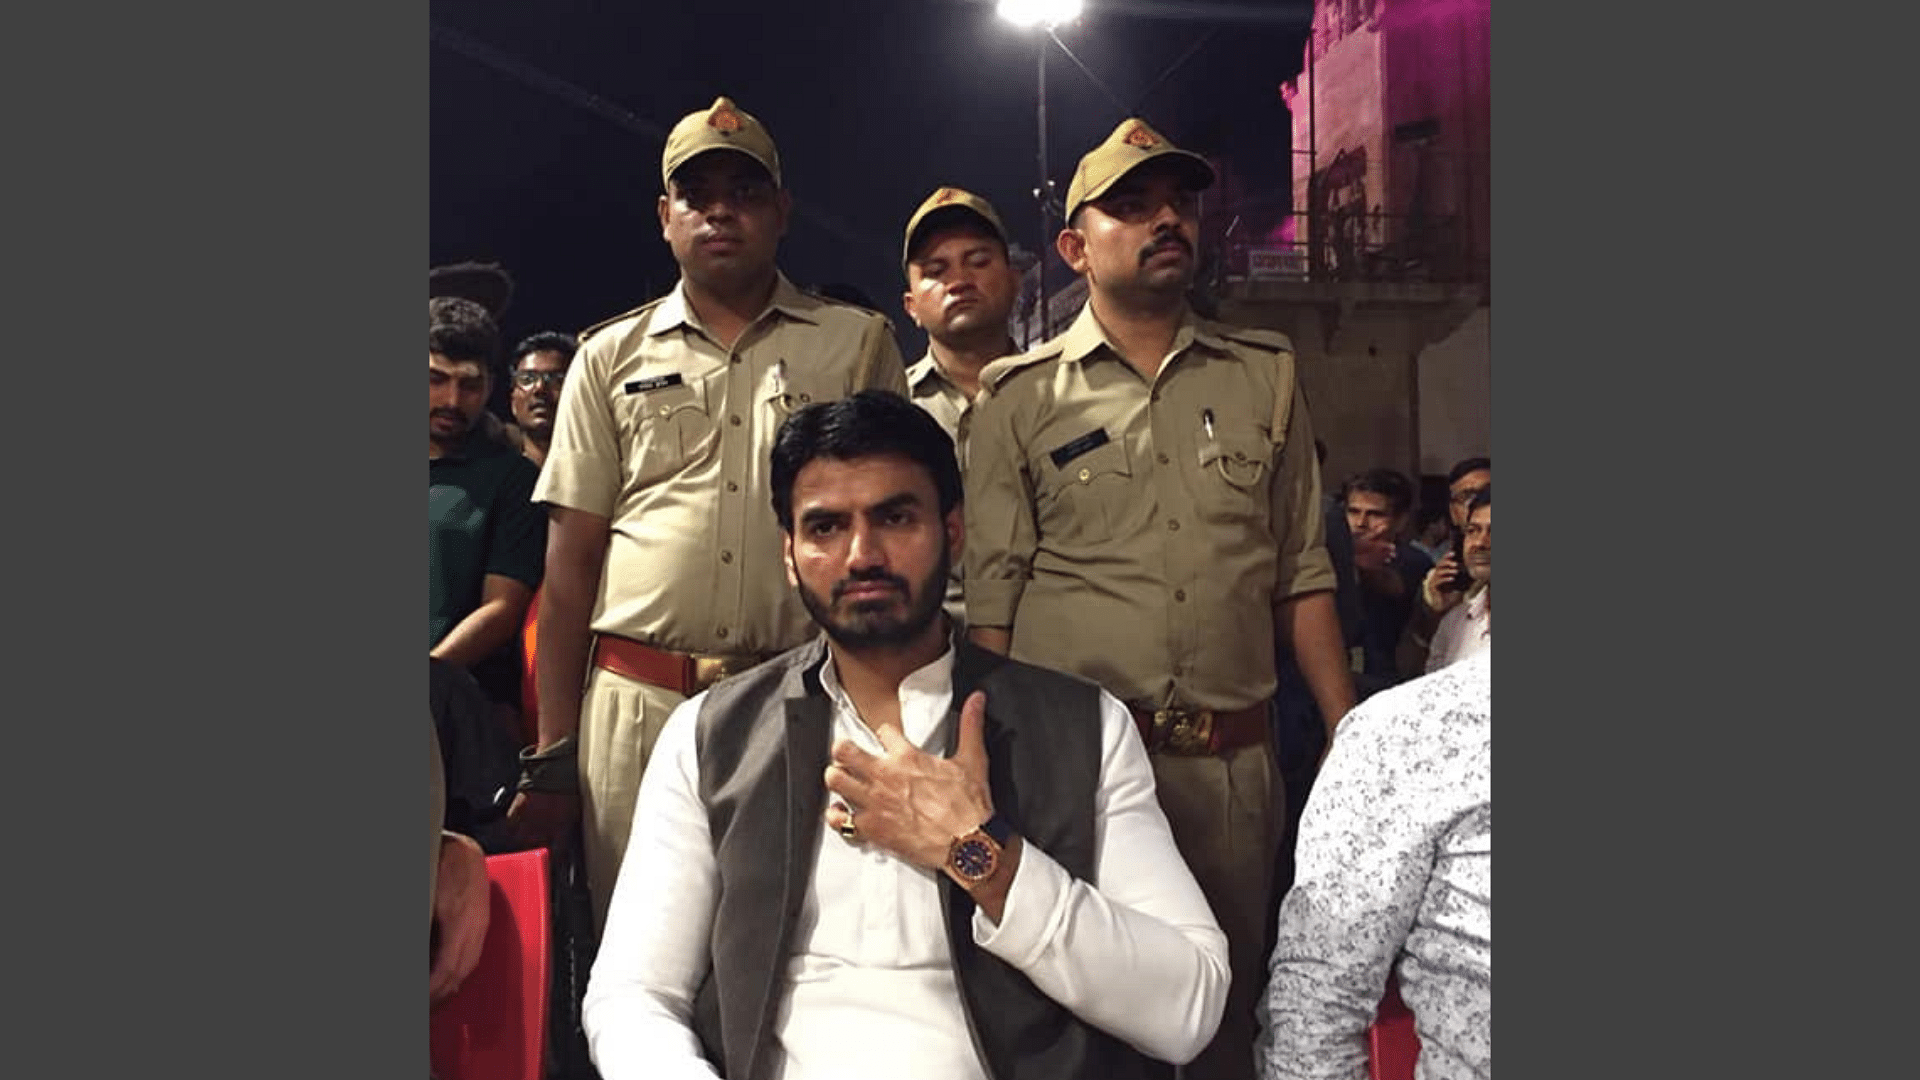 <div class="paragraphs"><p>Days after the Bharatiya Janata Party leader (BJP) Shrikant Tyagi was booked by the <a href="https://www.thequint.com/news/india/delhi-high-court-censures-uttar-pradesh-police-over-22-year-old-trans-person-whisked-away-from-shelter">Uttar Pradesh police</a> for <a href="https://www.thequint.com/news/politics/bjp-leader-shrikant-tyagi-booked-for-making-derogatory-statements-assaulting-woman-noida#read-more">assaulting</a> a woman after an argument with her inside a housing society in Noida, bulldozers arrived at the site on Monday, 8 August.</p></div>